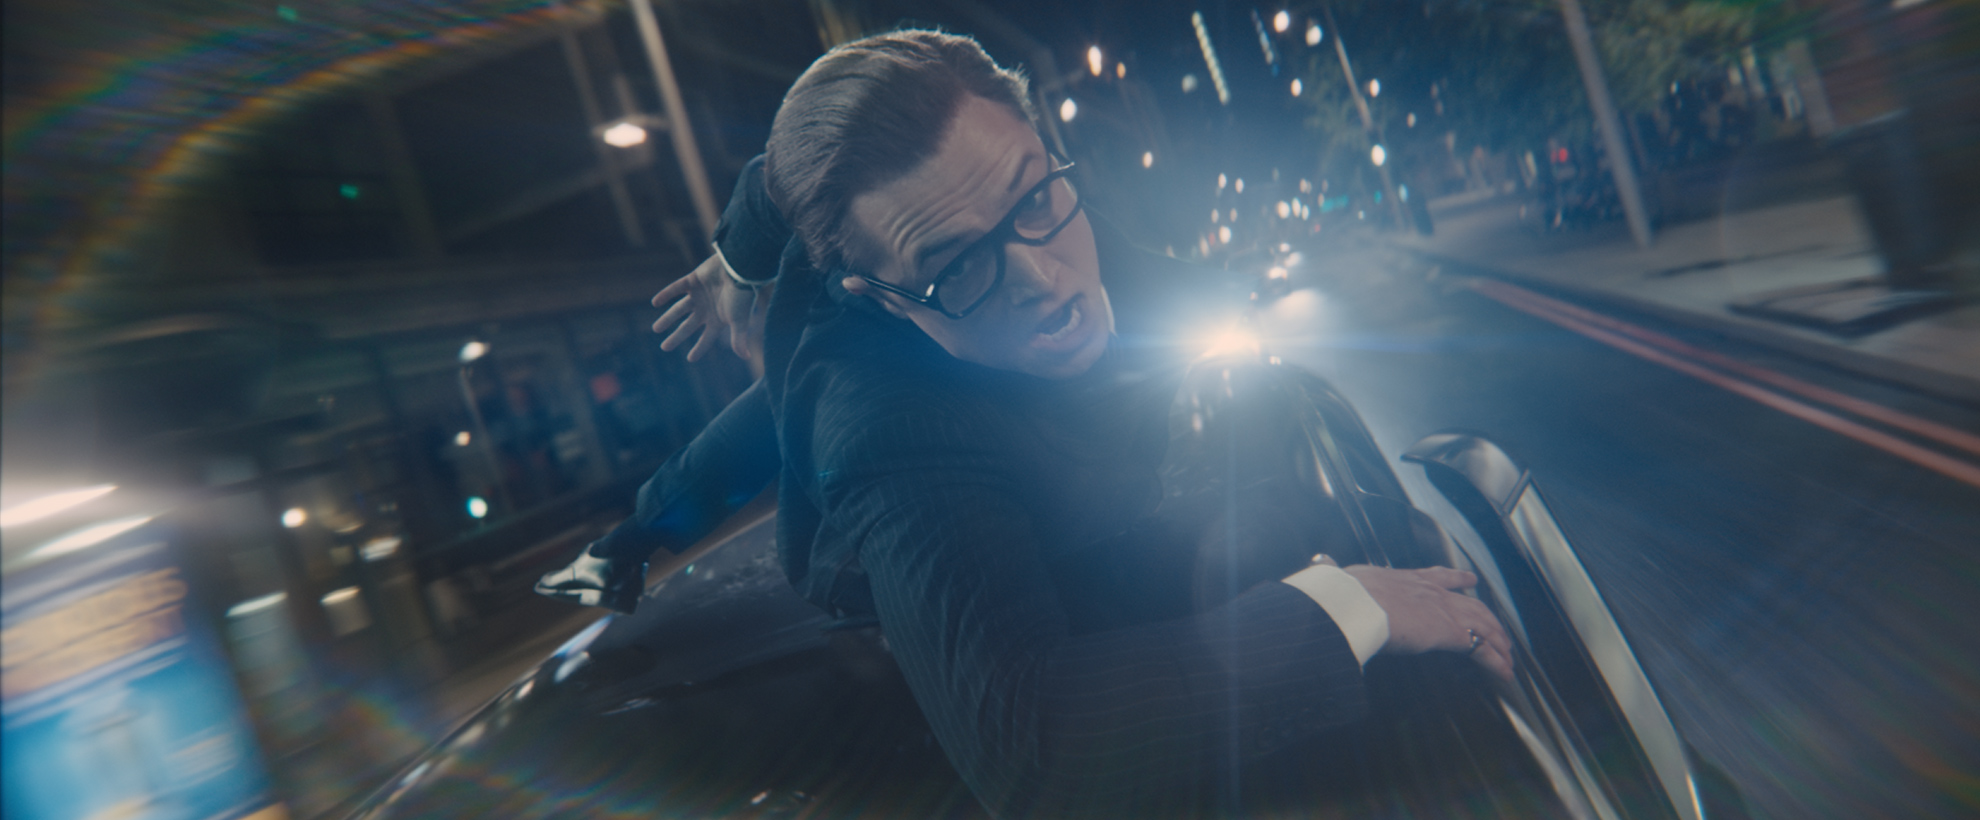 Eggsy (Taron Egerton) hangs on to the roof of a black taxi, speeding through London at night time